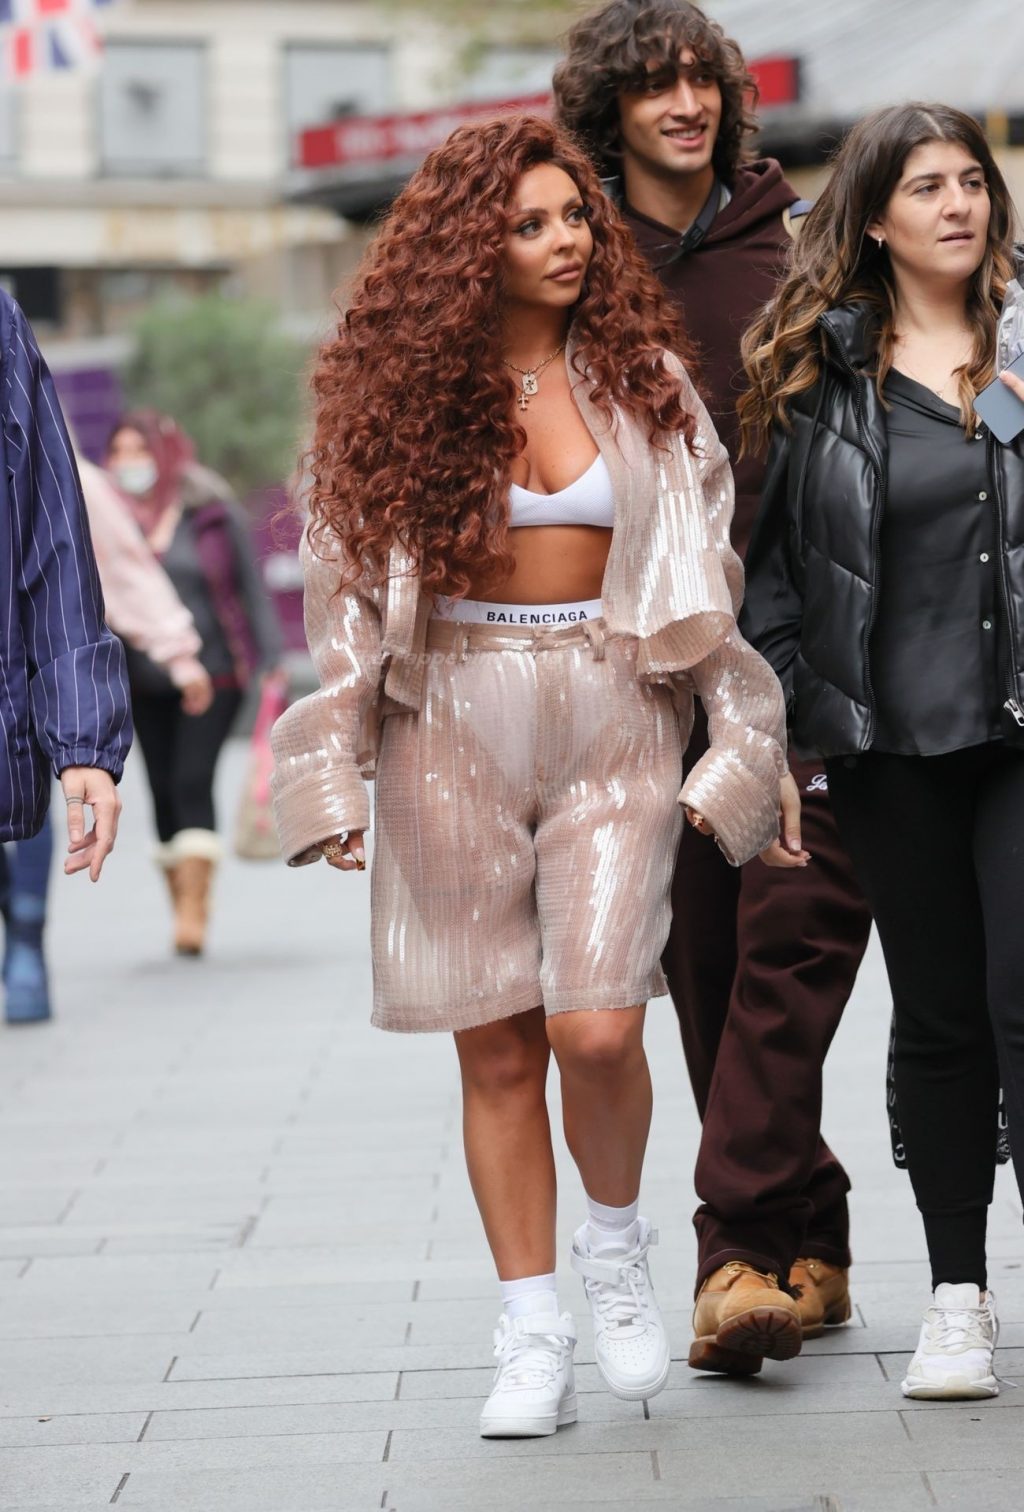 Jesy Nelson Looks Hot in a Revealing Outfit After Releasing Her First Solo Single (139 Photos)